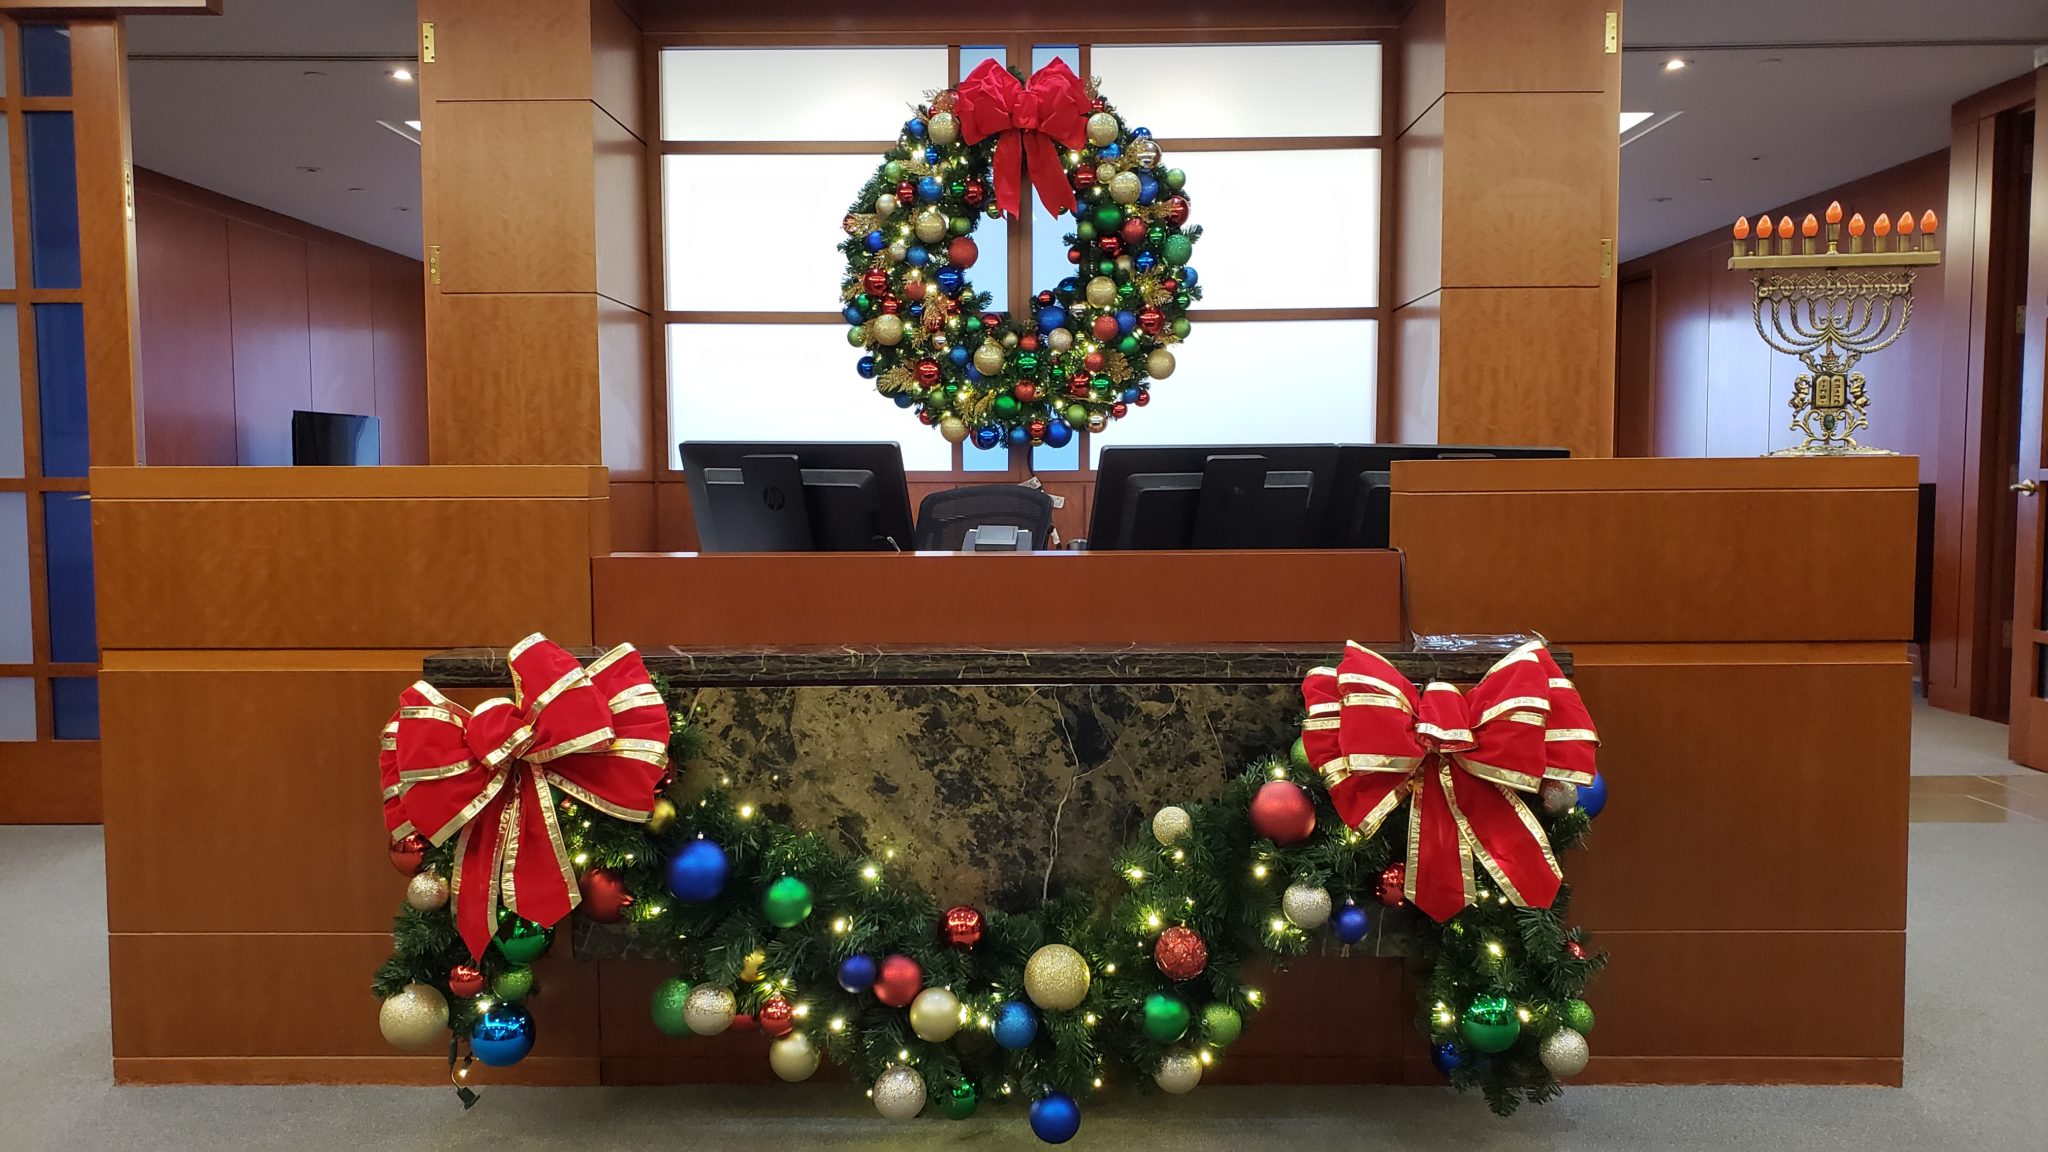 Neave Décor specializes in commercial holiday decor, transforming these spaces into spirited hubs where employees feel the holiday cheer